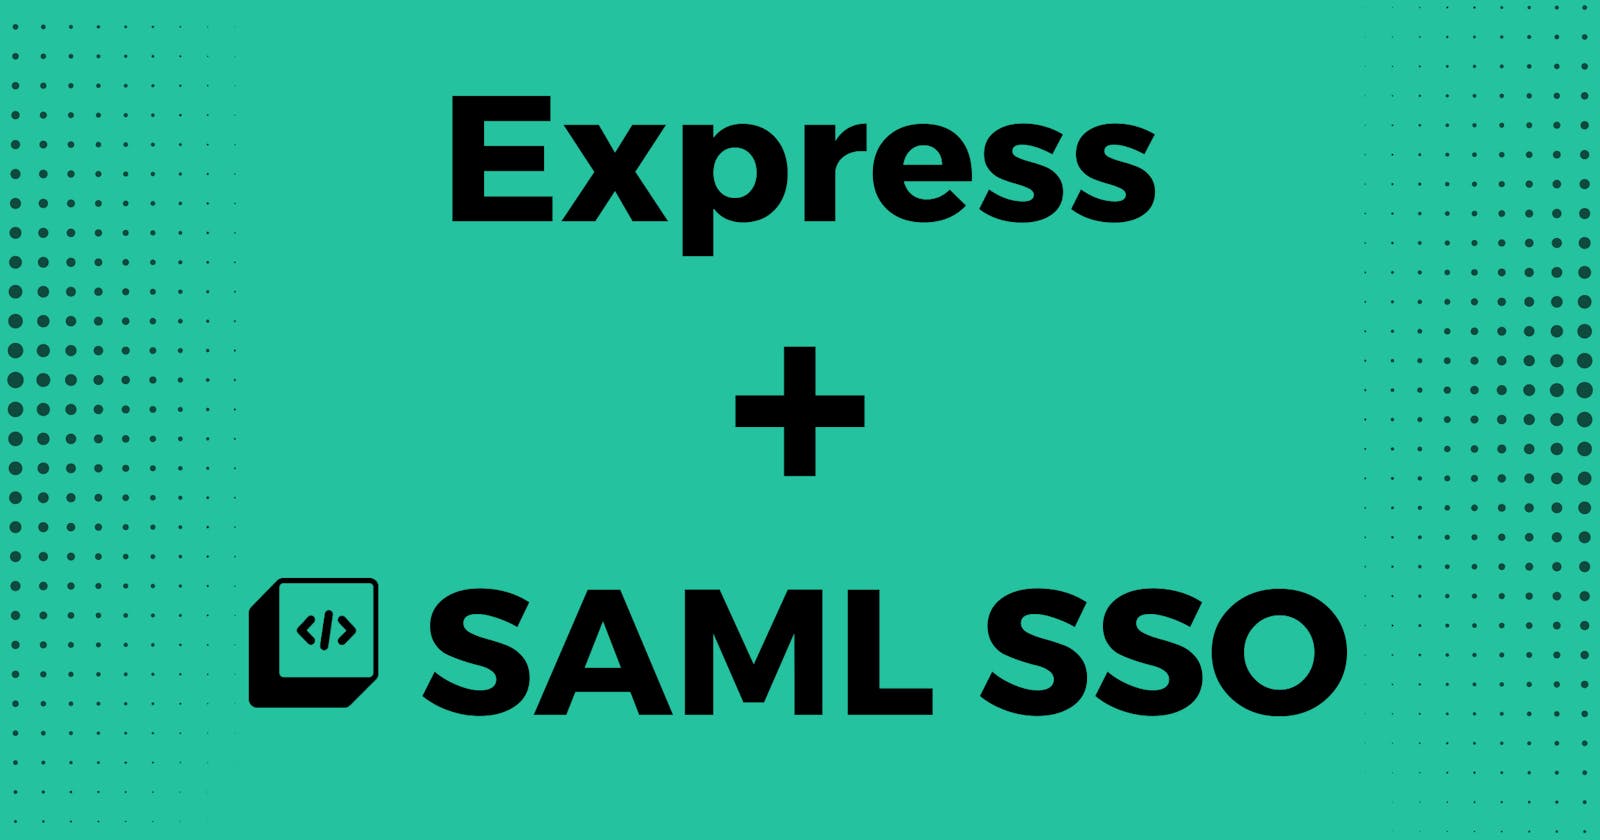 How to add SAML Single Sign On to an Express app